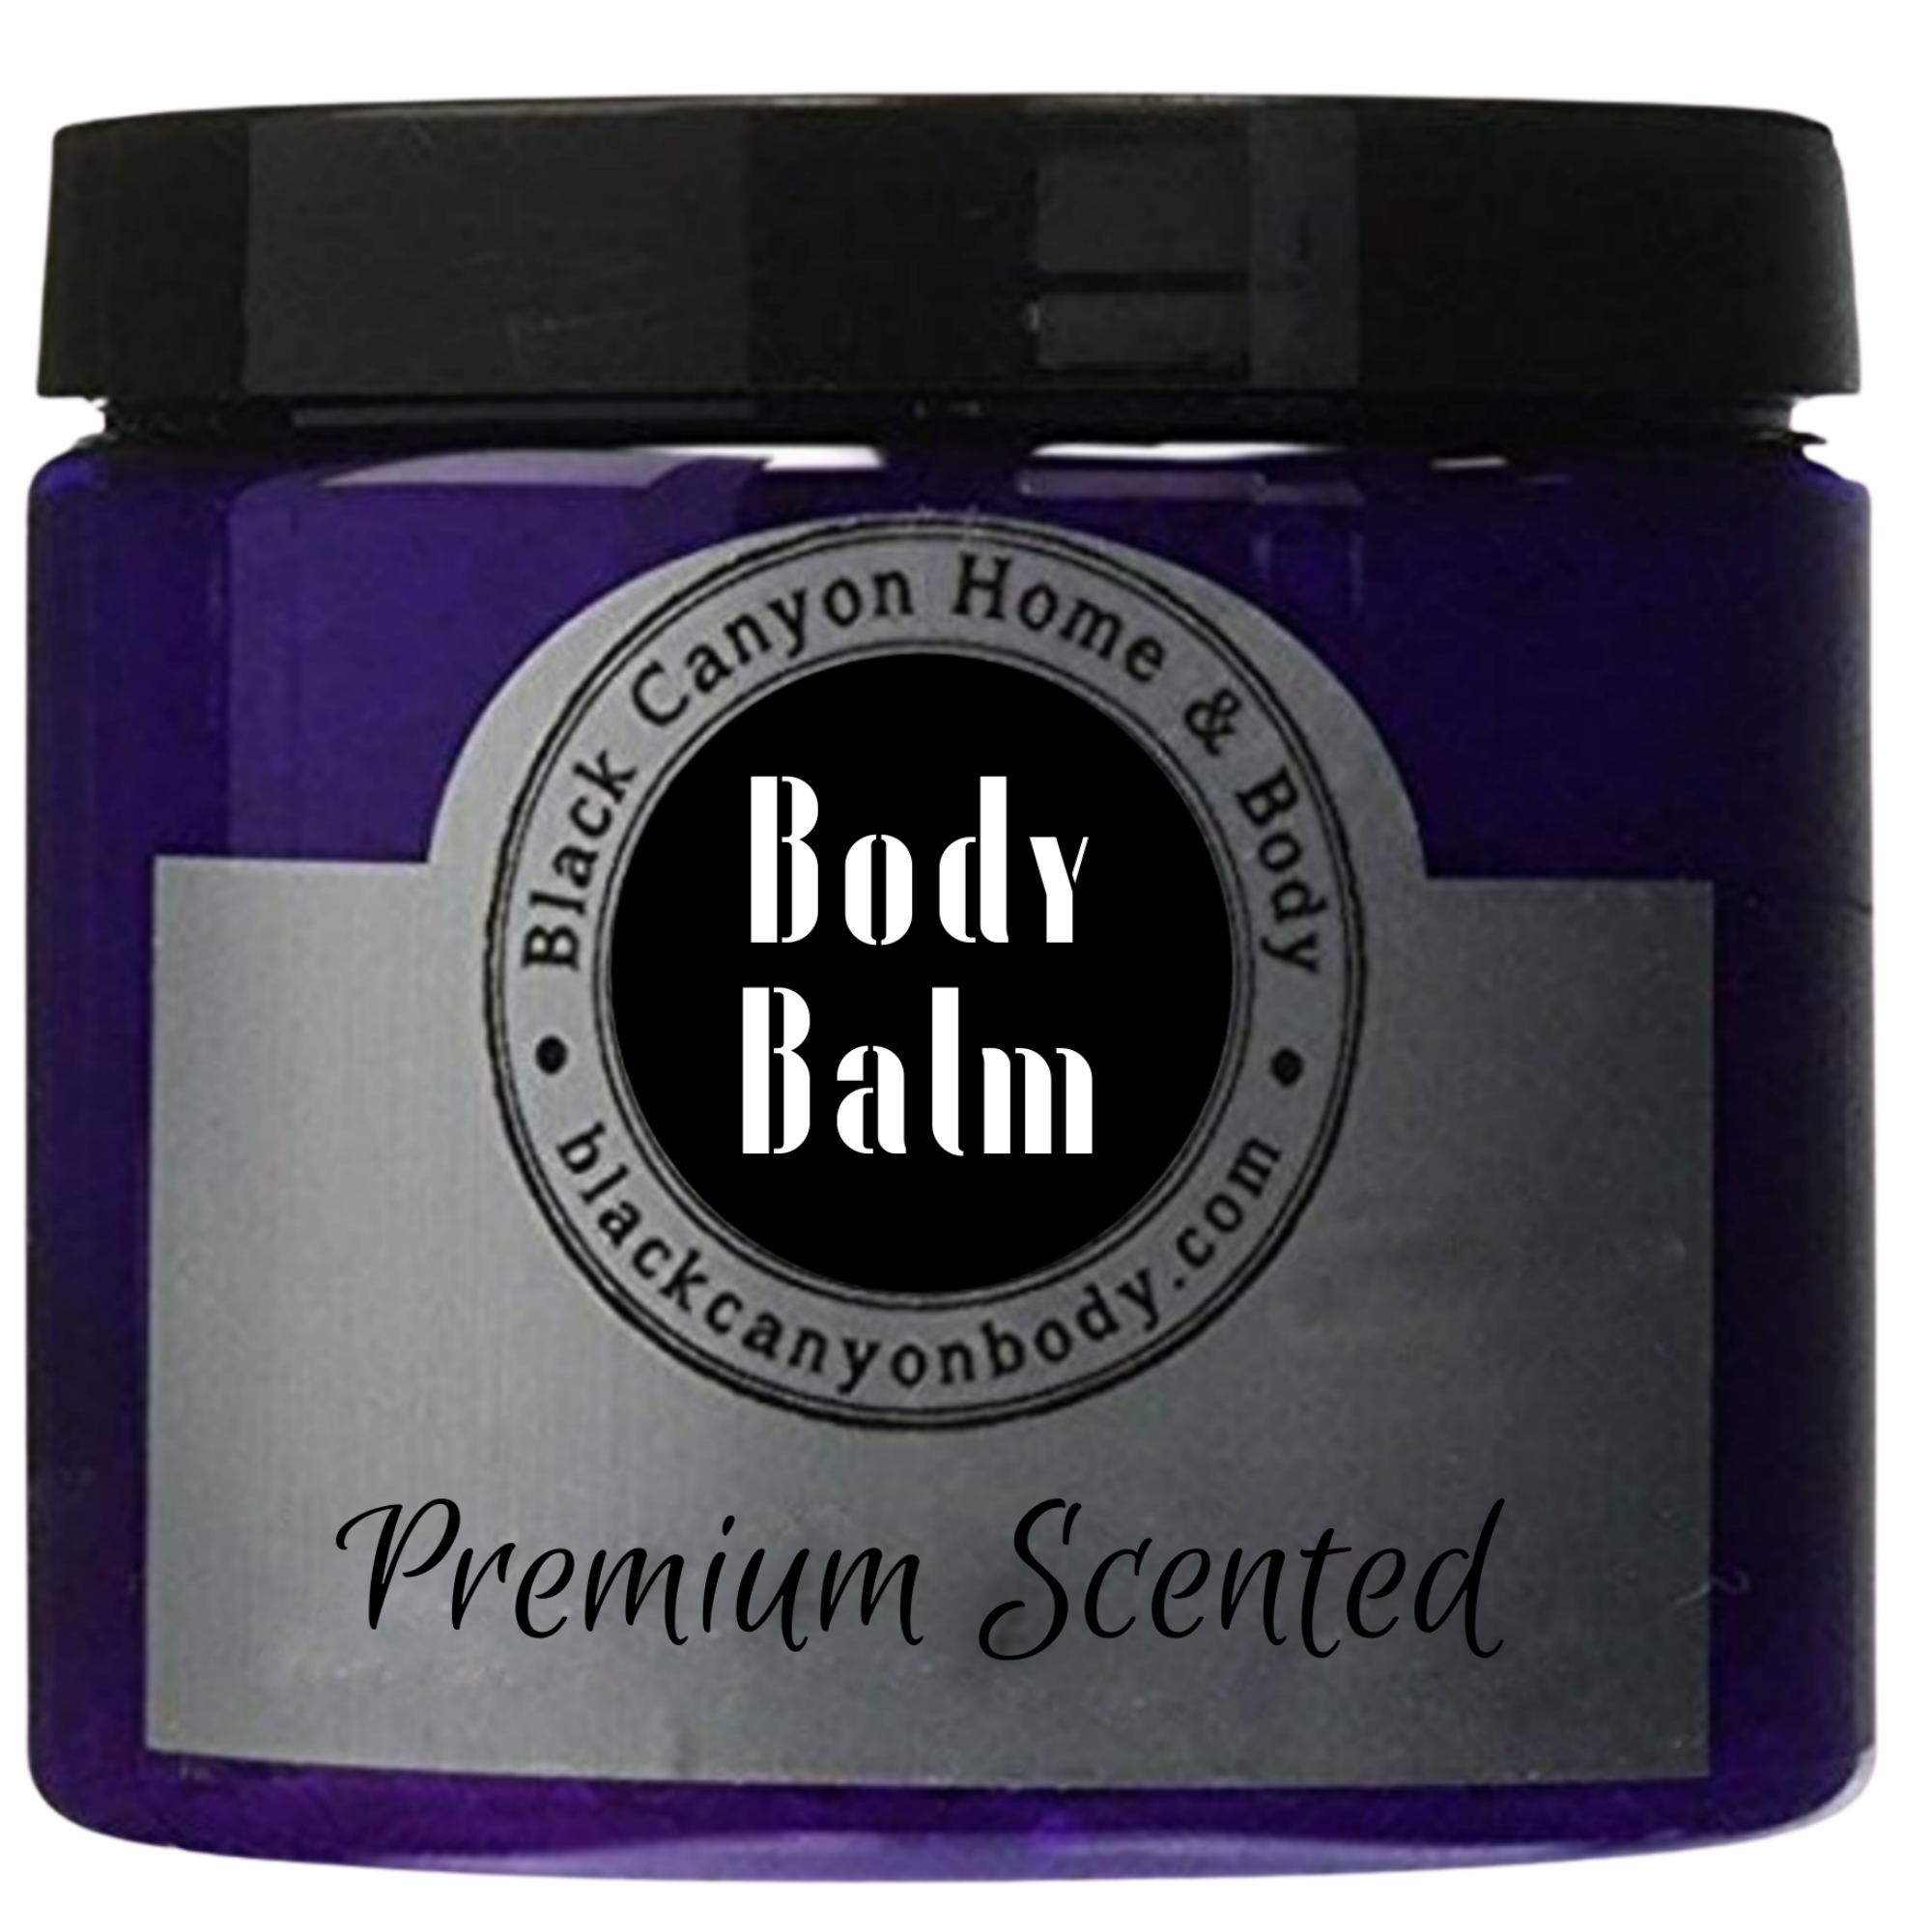 Black Canyon Berry Shortcake & Whipped Cream Scented Natural Body Balm with Shea